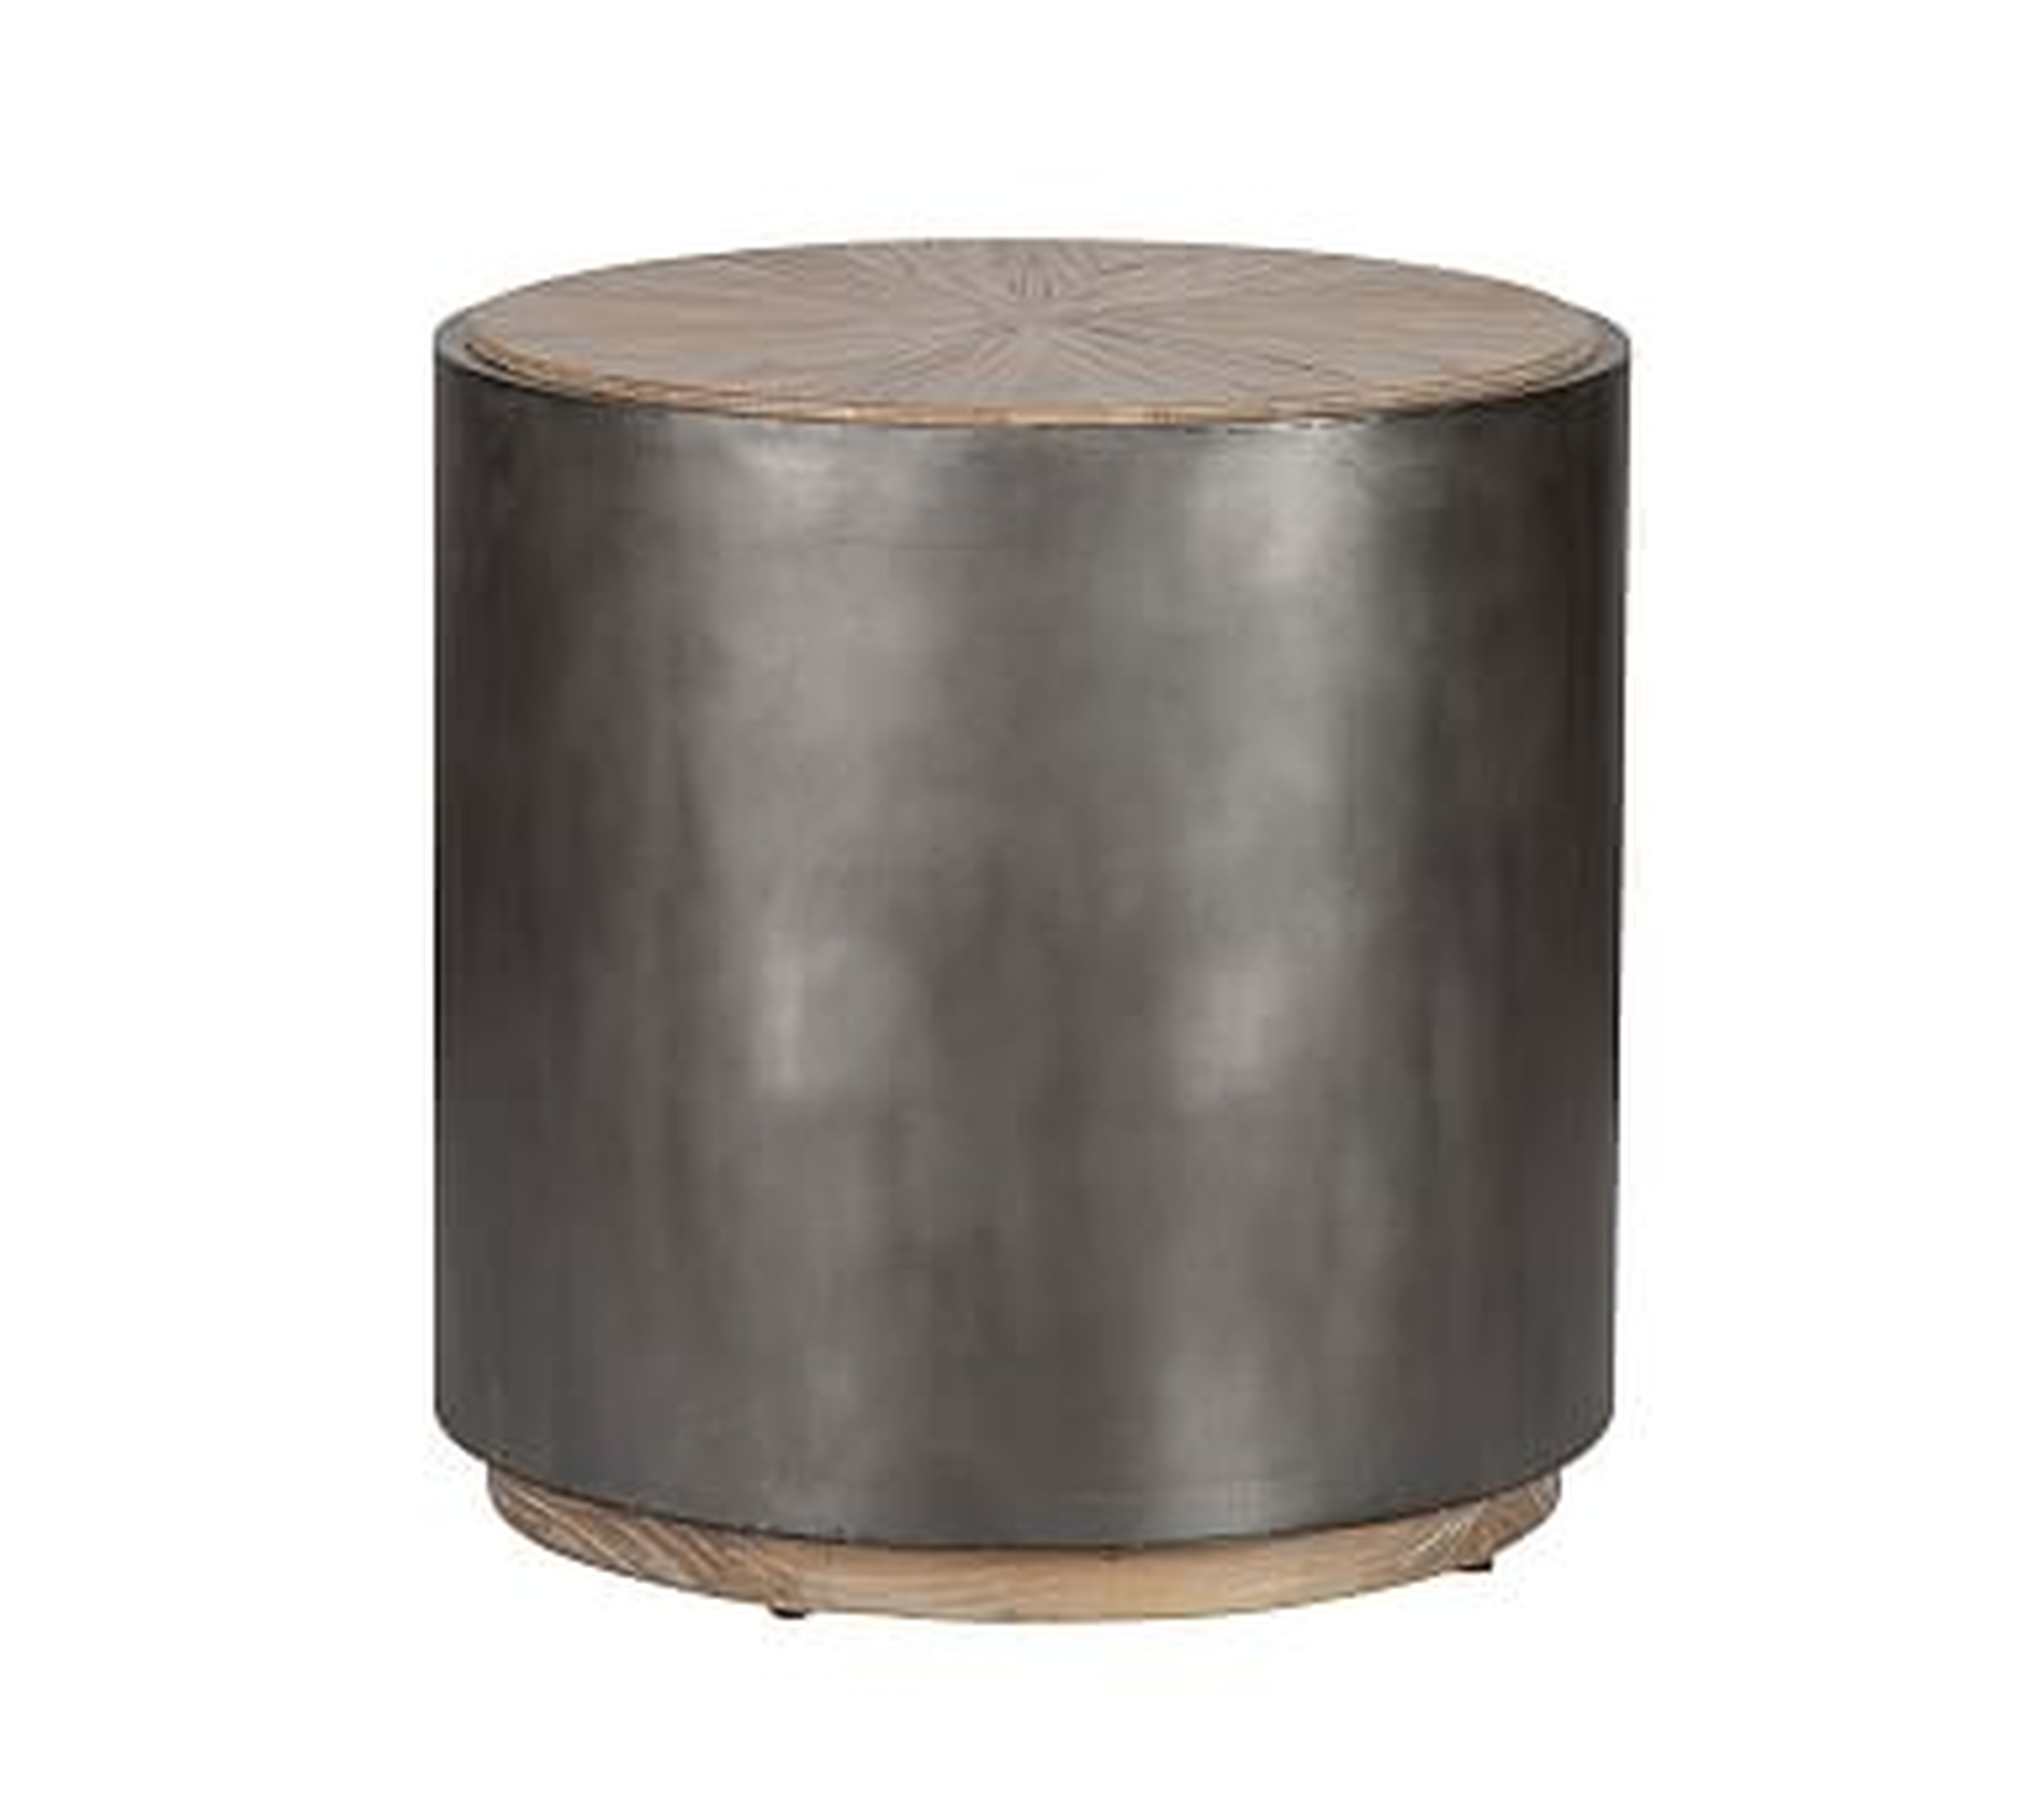 Brockton Metal Wrapped Reclaimed Wood End Table, Antiqued Black - Pottery Barn